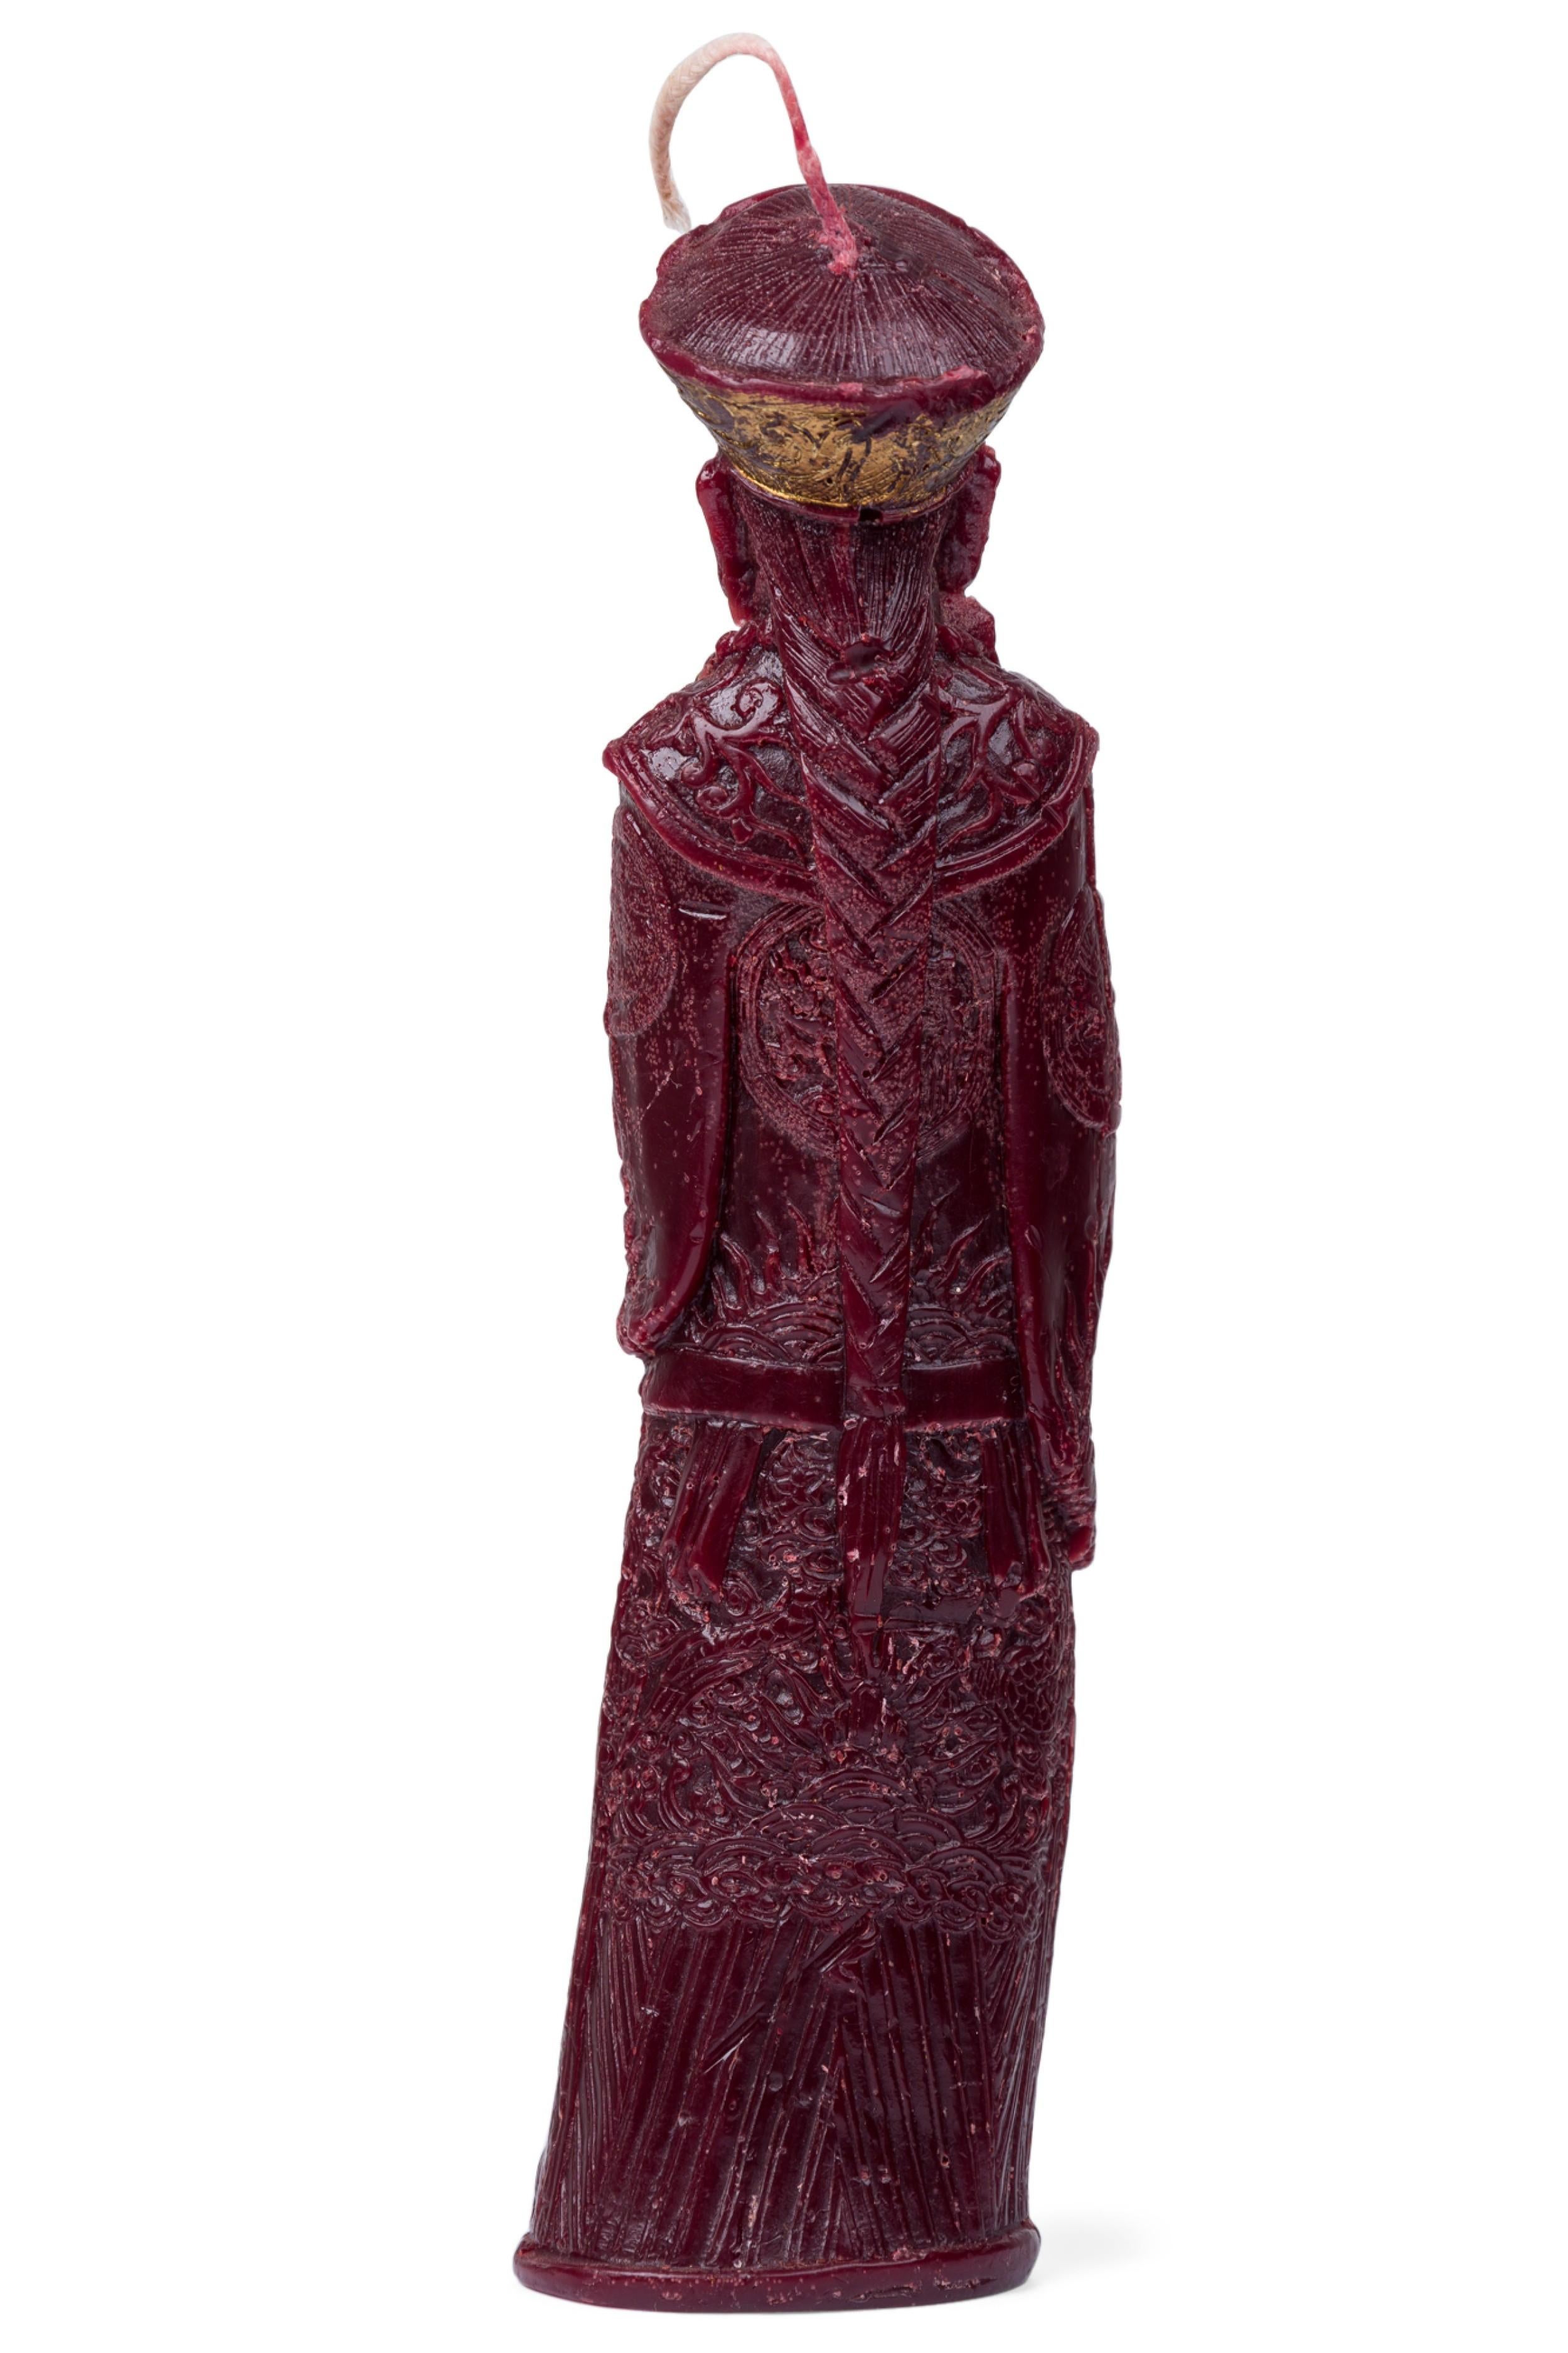 Chinese Wax Candle Figure Depicting an Emperor For Sale 7